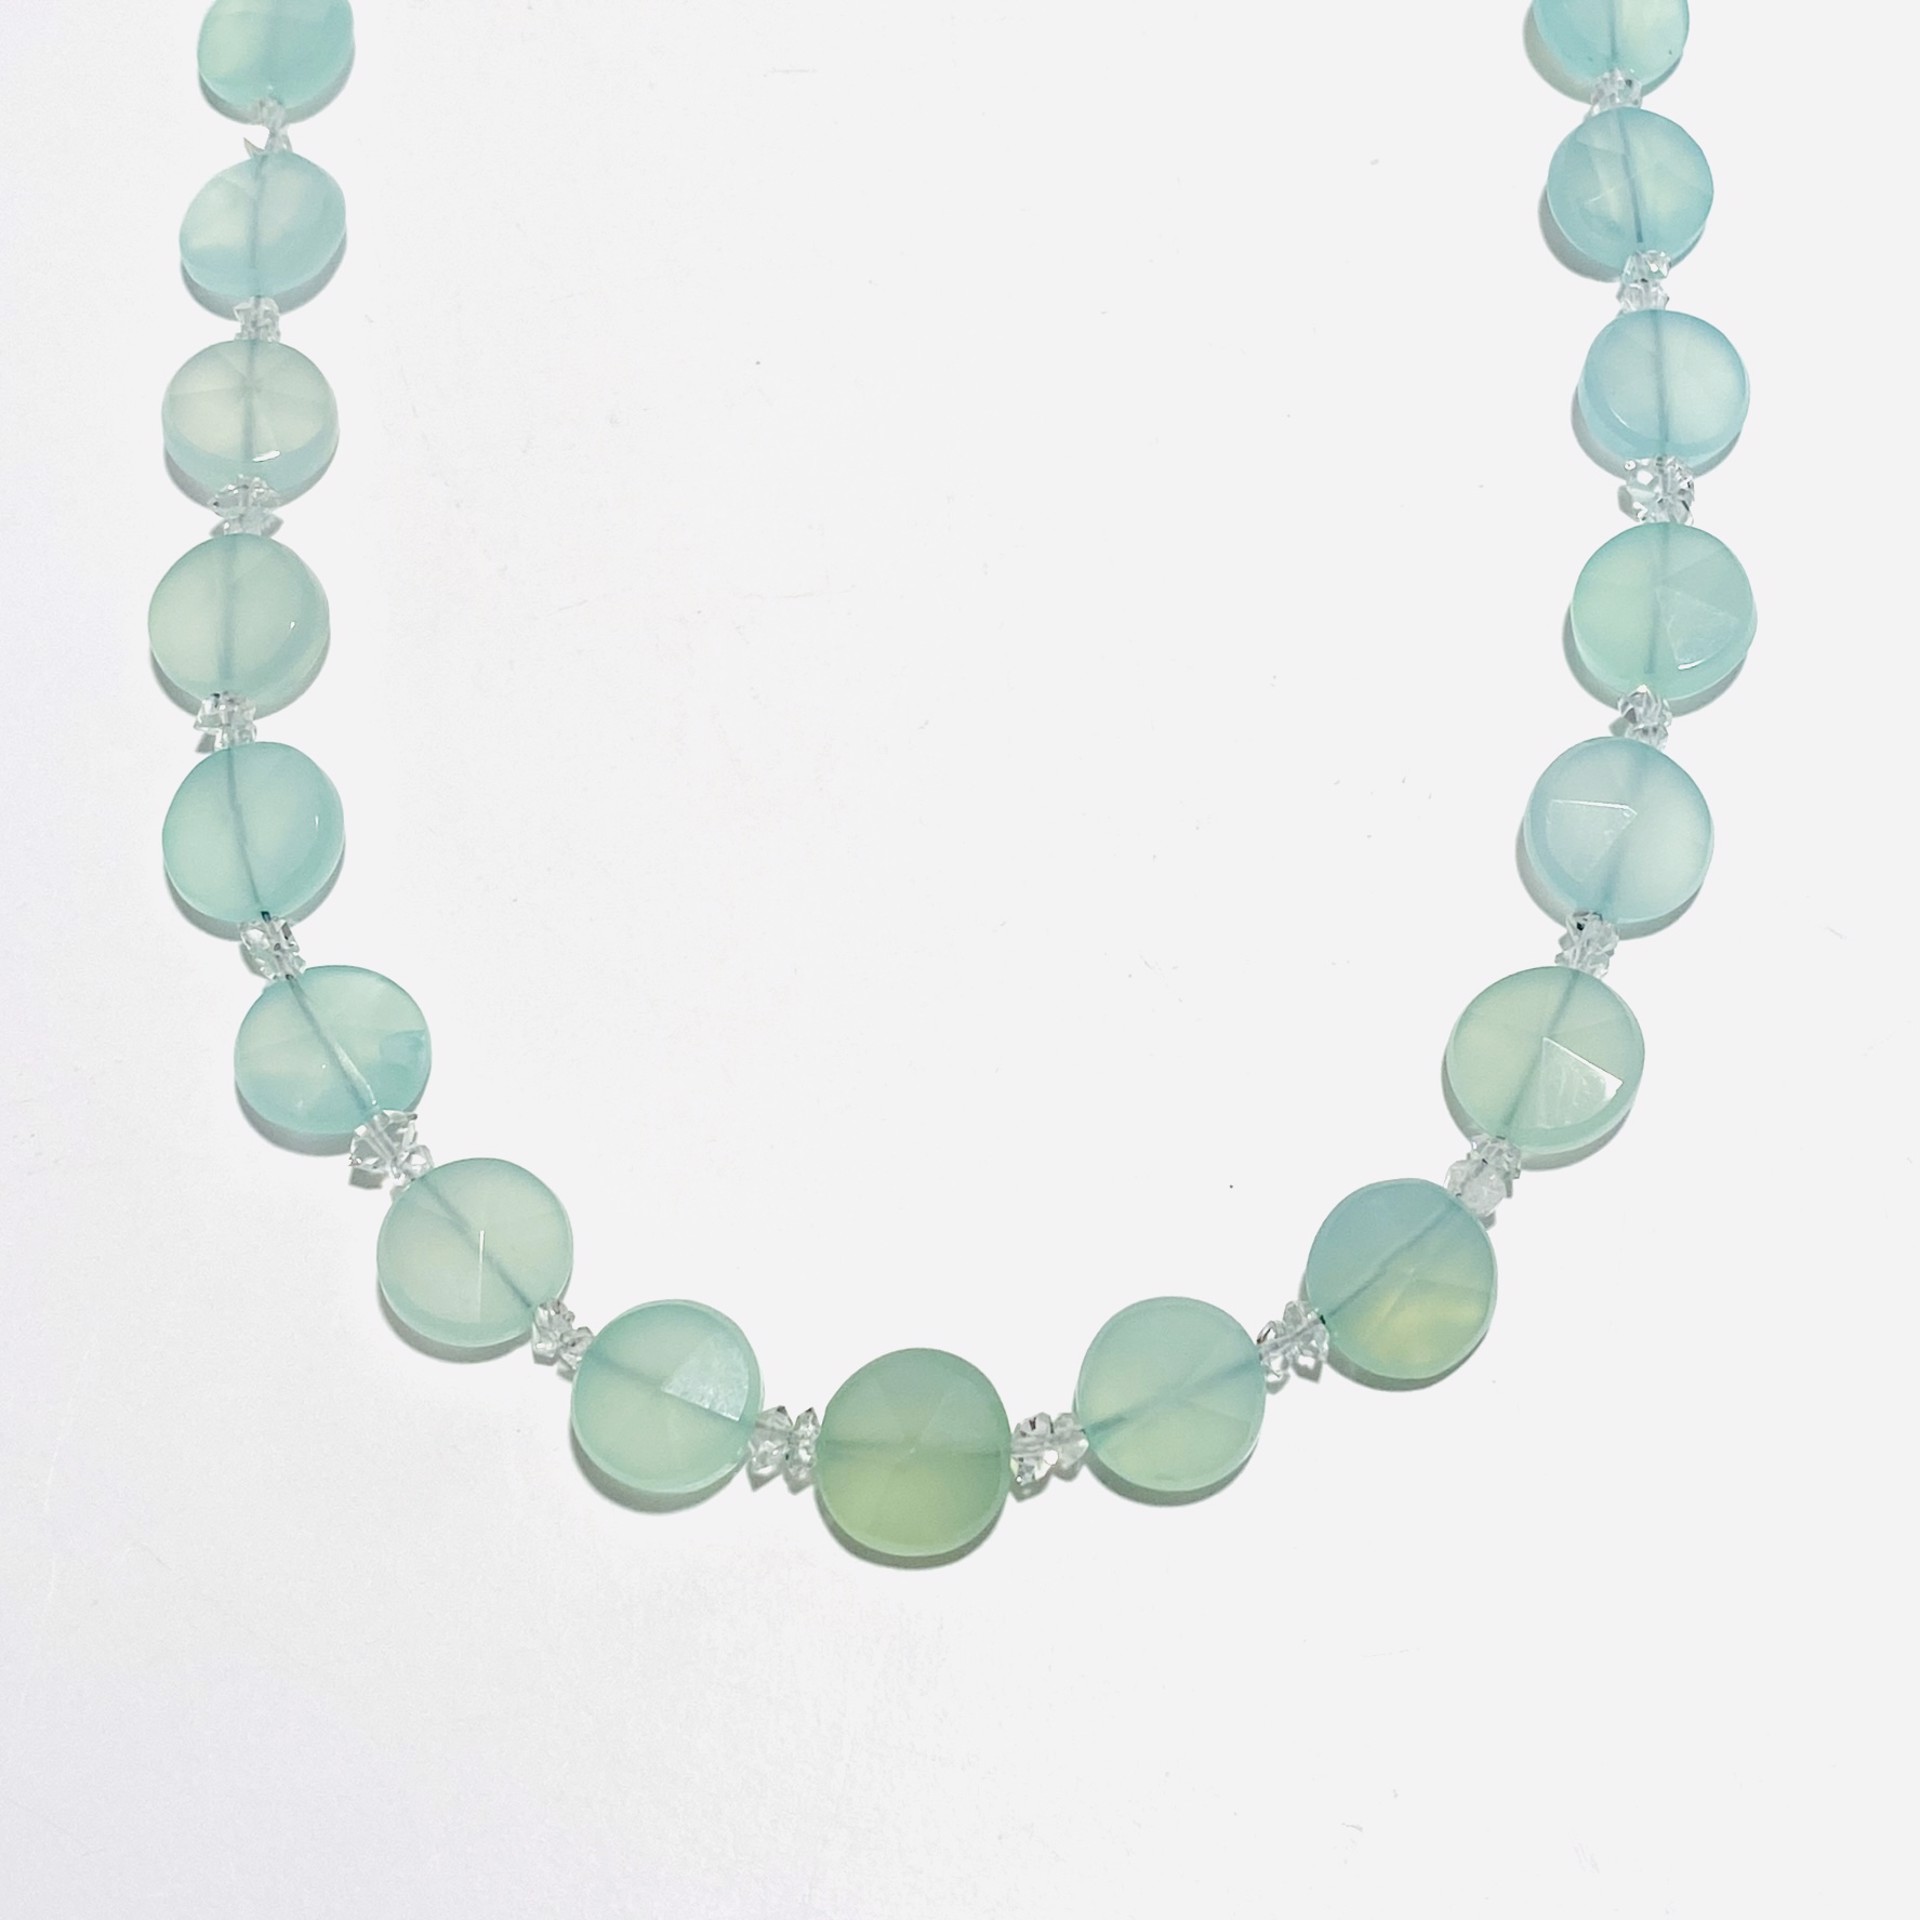 Faceted Round Aqua Chalcedony Herkimer Diamond Necklace by Nance Trueworthy